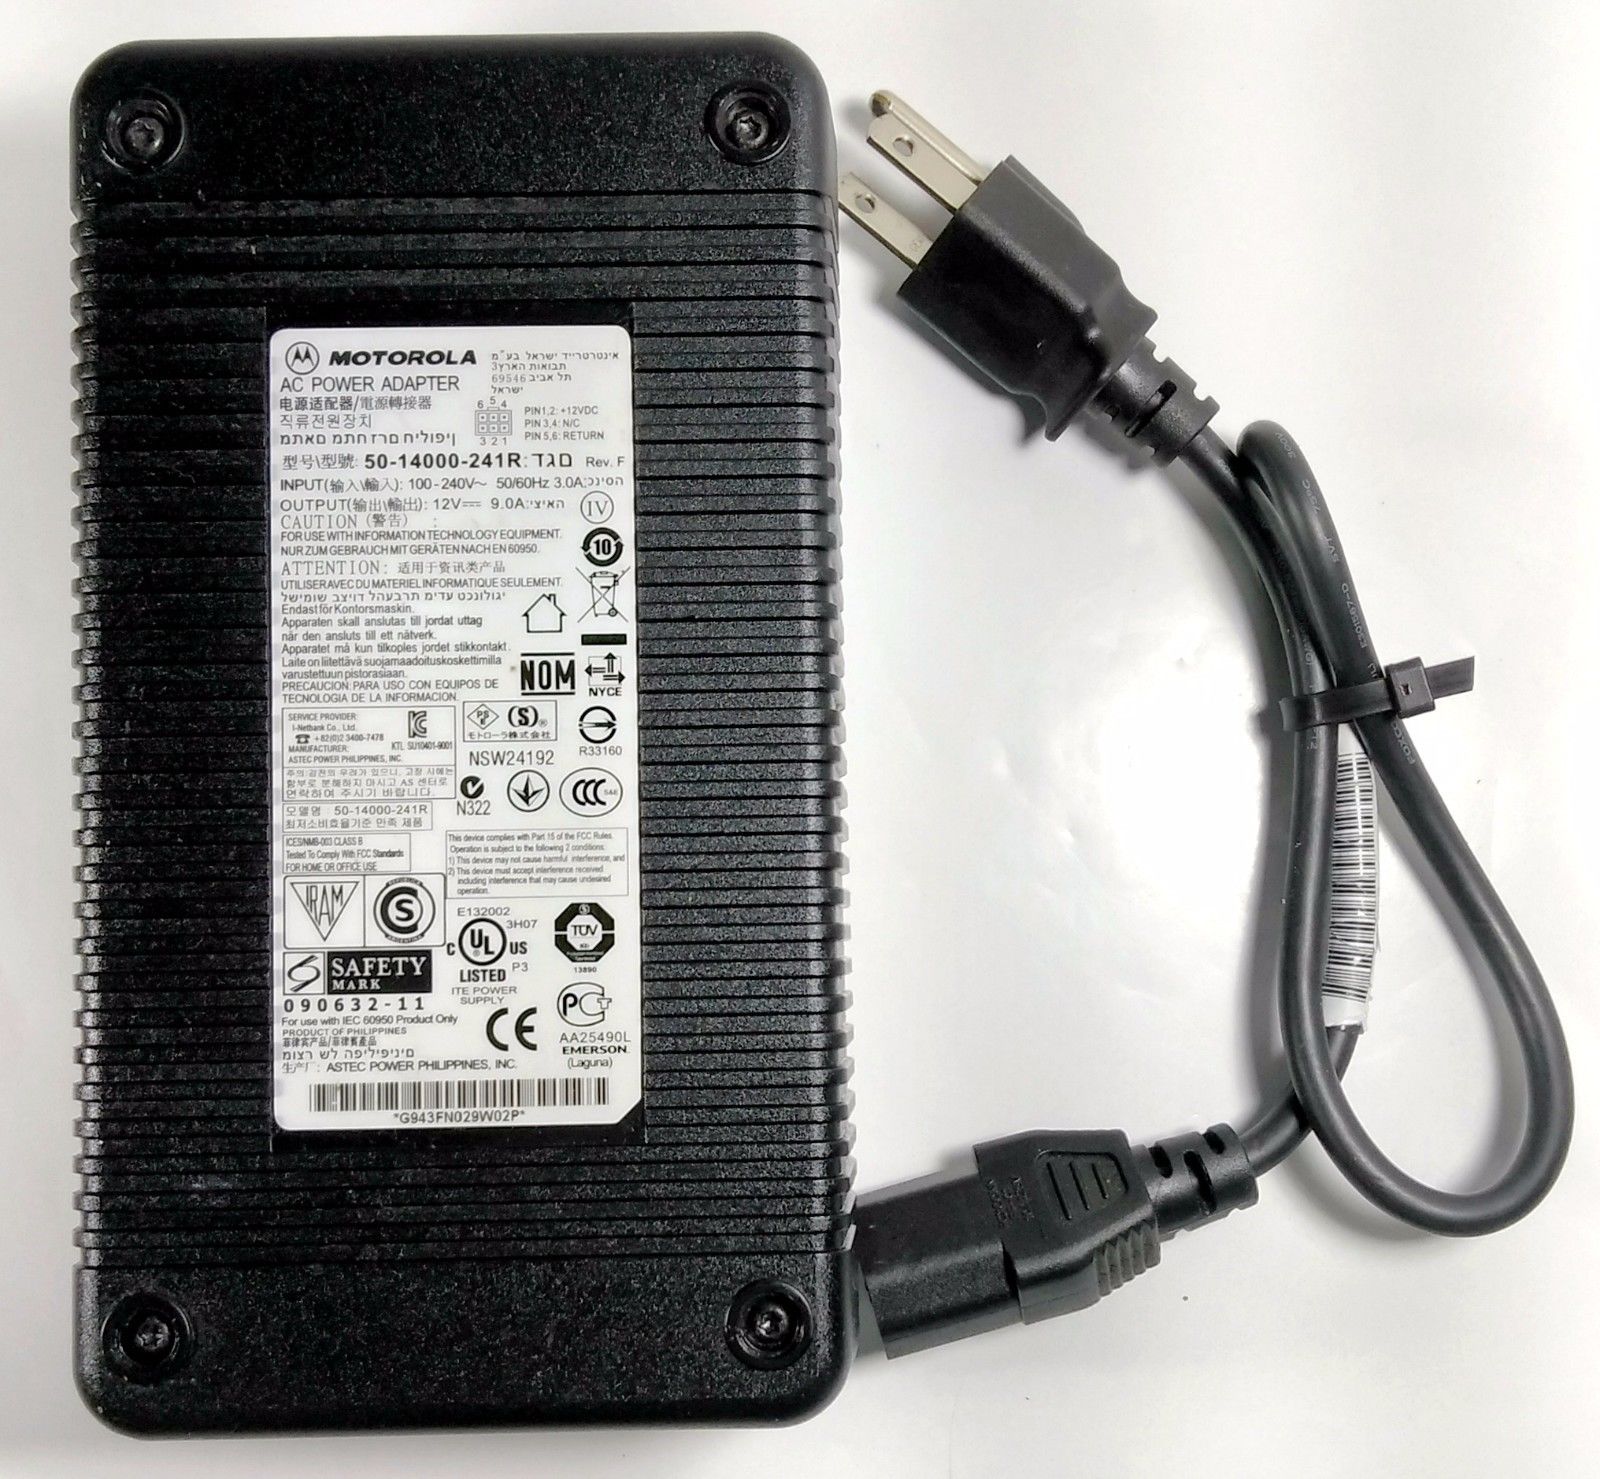 NEW 12V 9A Motorola 50-14000-241R AC Adapter For 4-slot CRD4000 series